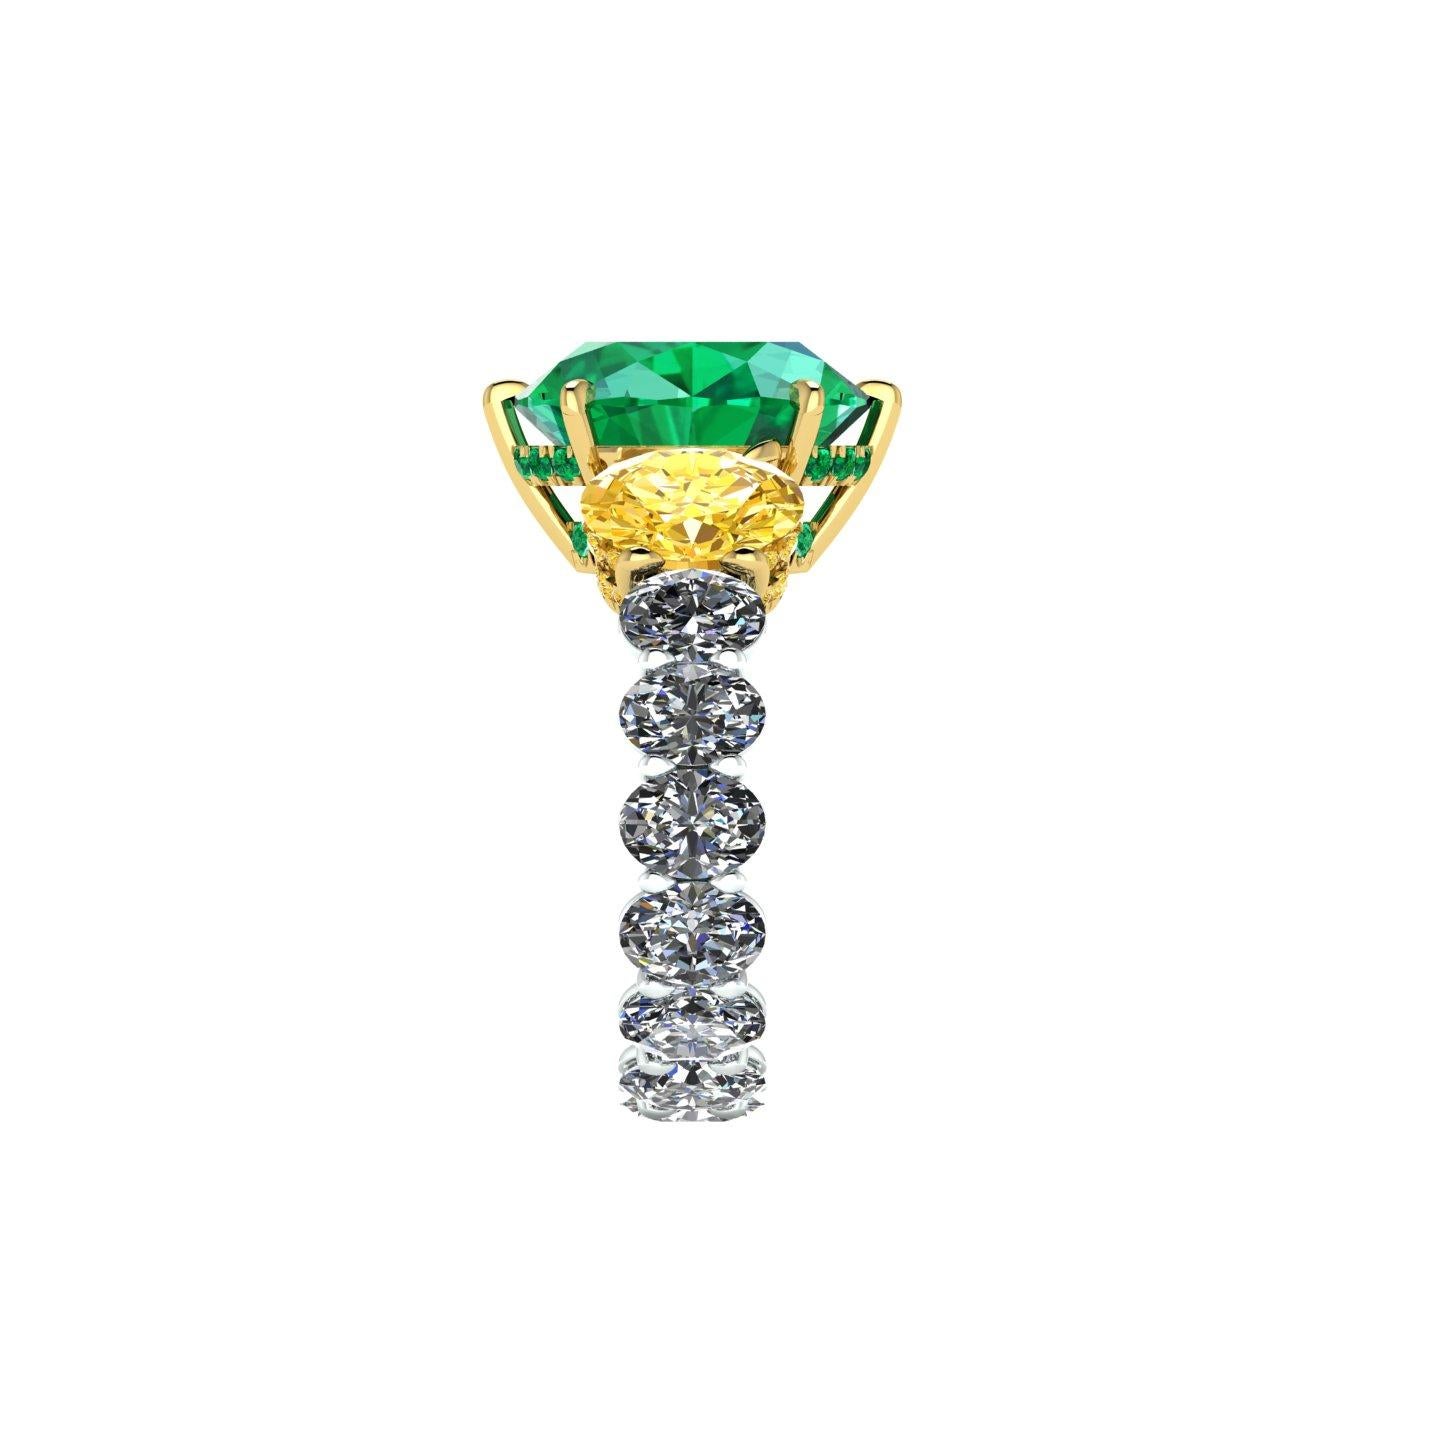 Contemporary 5.37 Carat Oval Emerald Yellow and White Oval Diamonds Platinum 18k Gold Ring